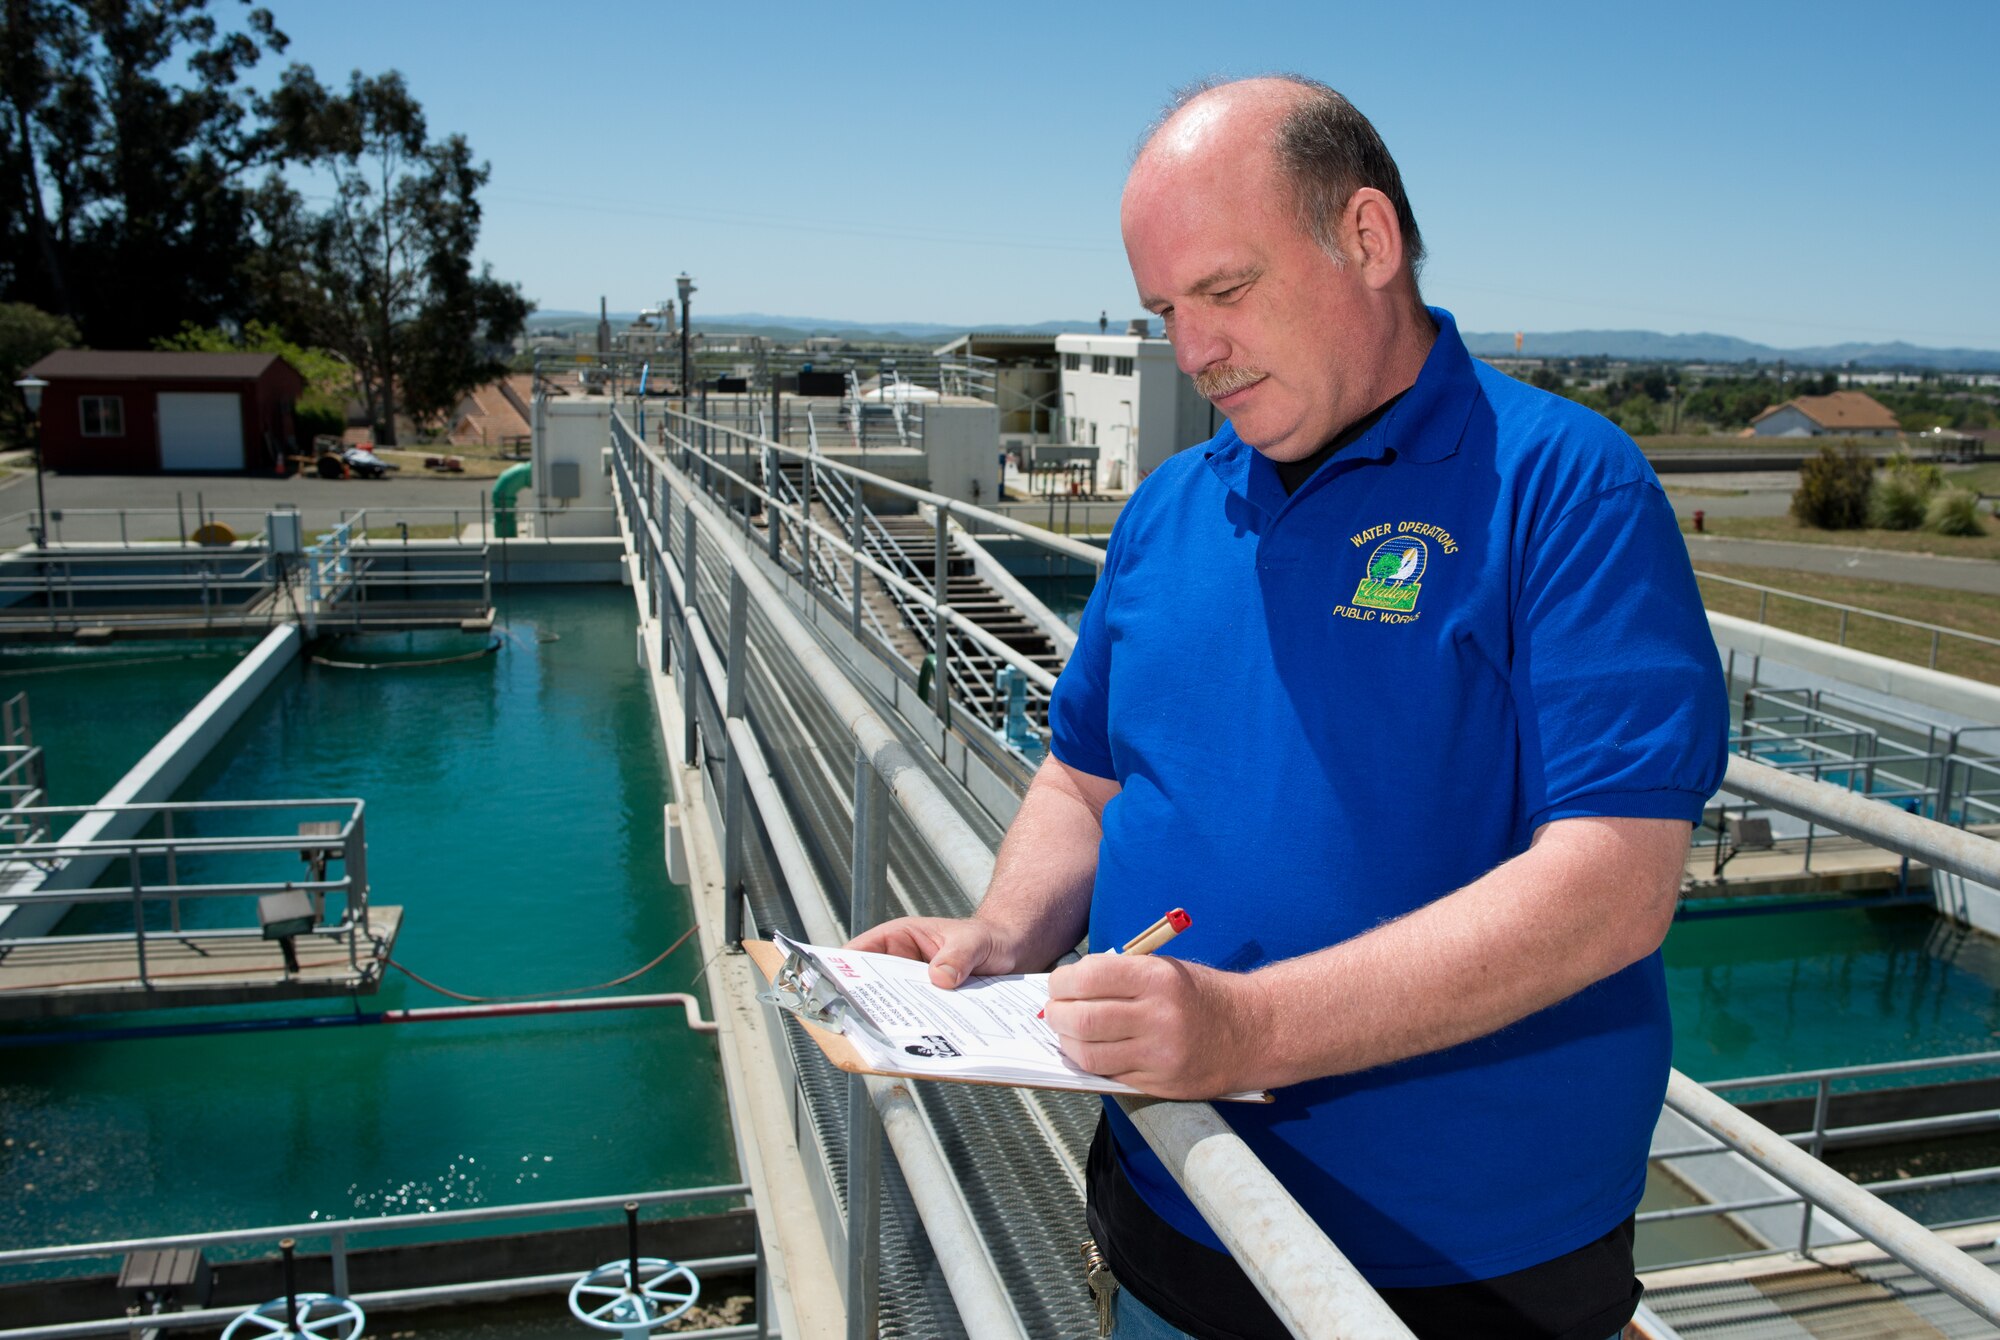 Roger Kasper, Travis Water Treatment Plant senior operator, surveys the quality of water April 17. The plant is capable of treating 7.5 million gallons of water per day. Kasper said personal and mission use average about 2.2 million gallons of water per day at Travis.